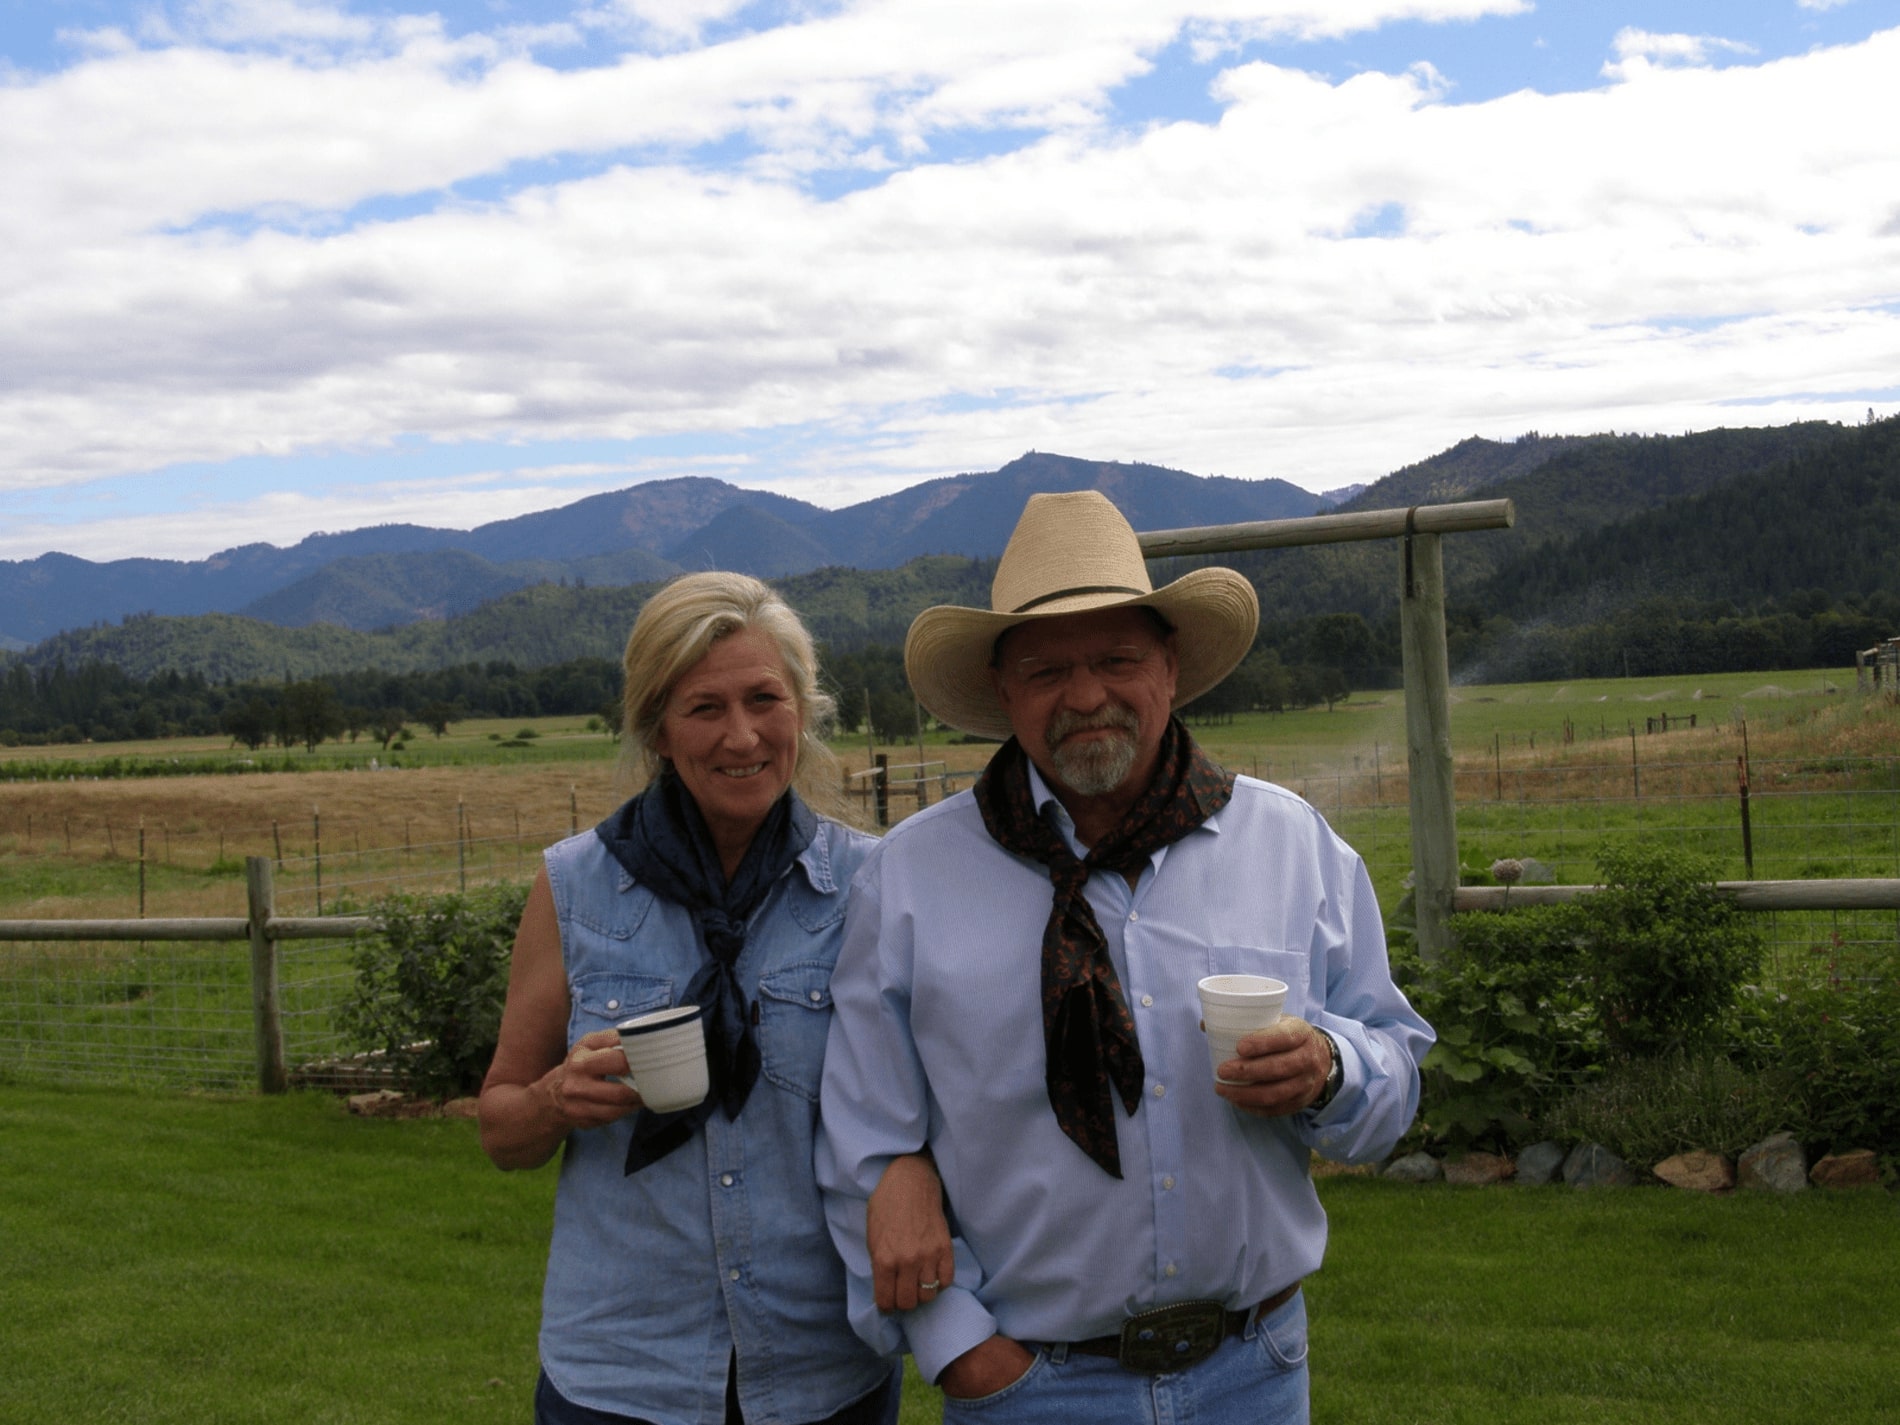 Plaisance Ranch owners standing infront of corral with mountain scape and clouds.